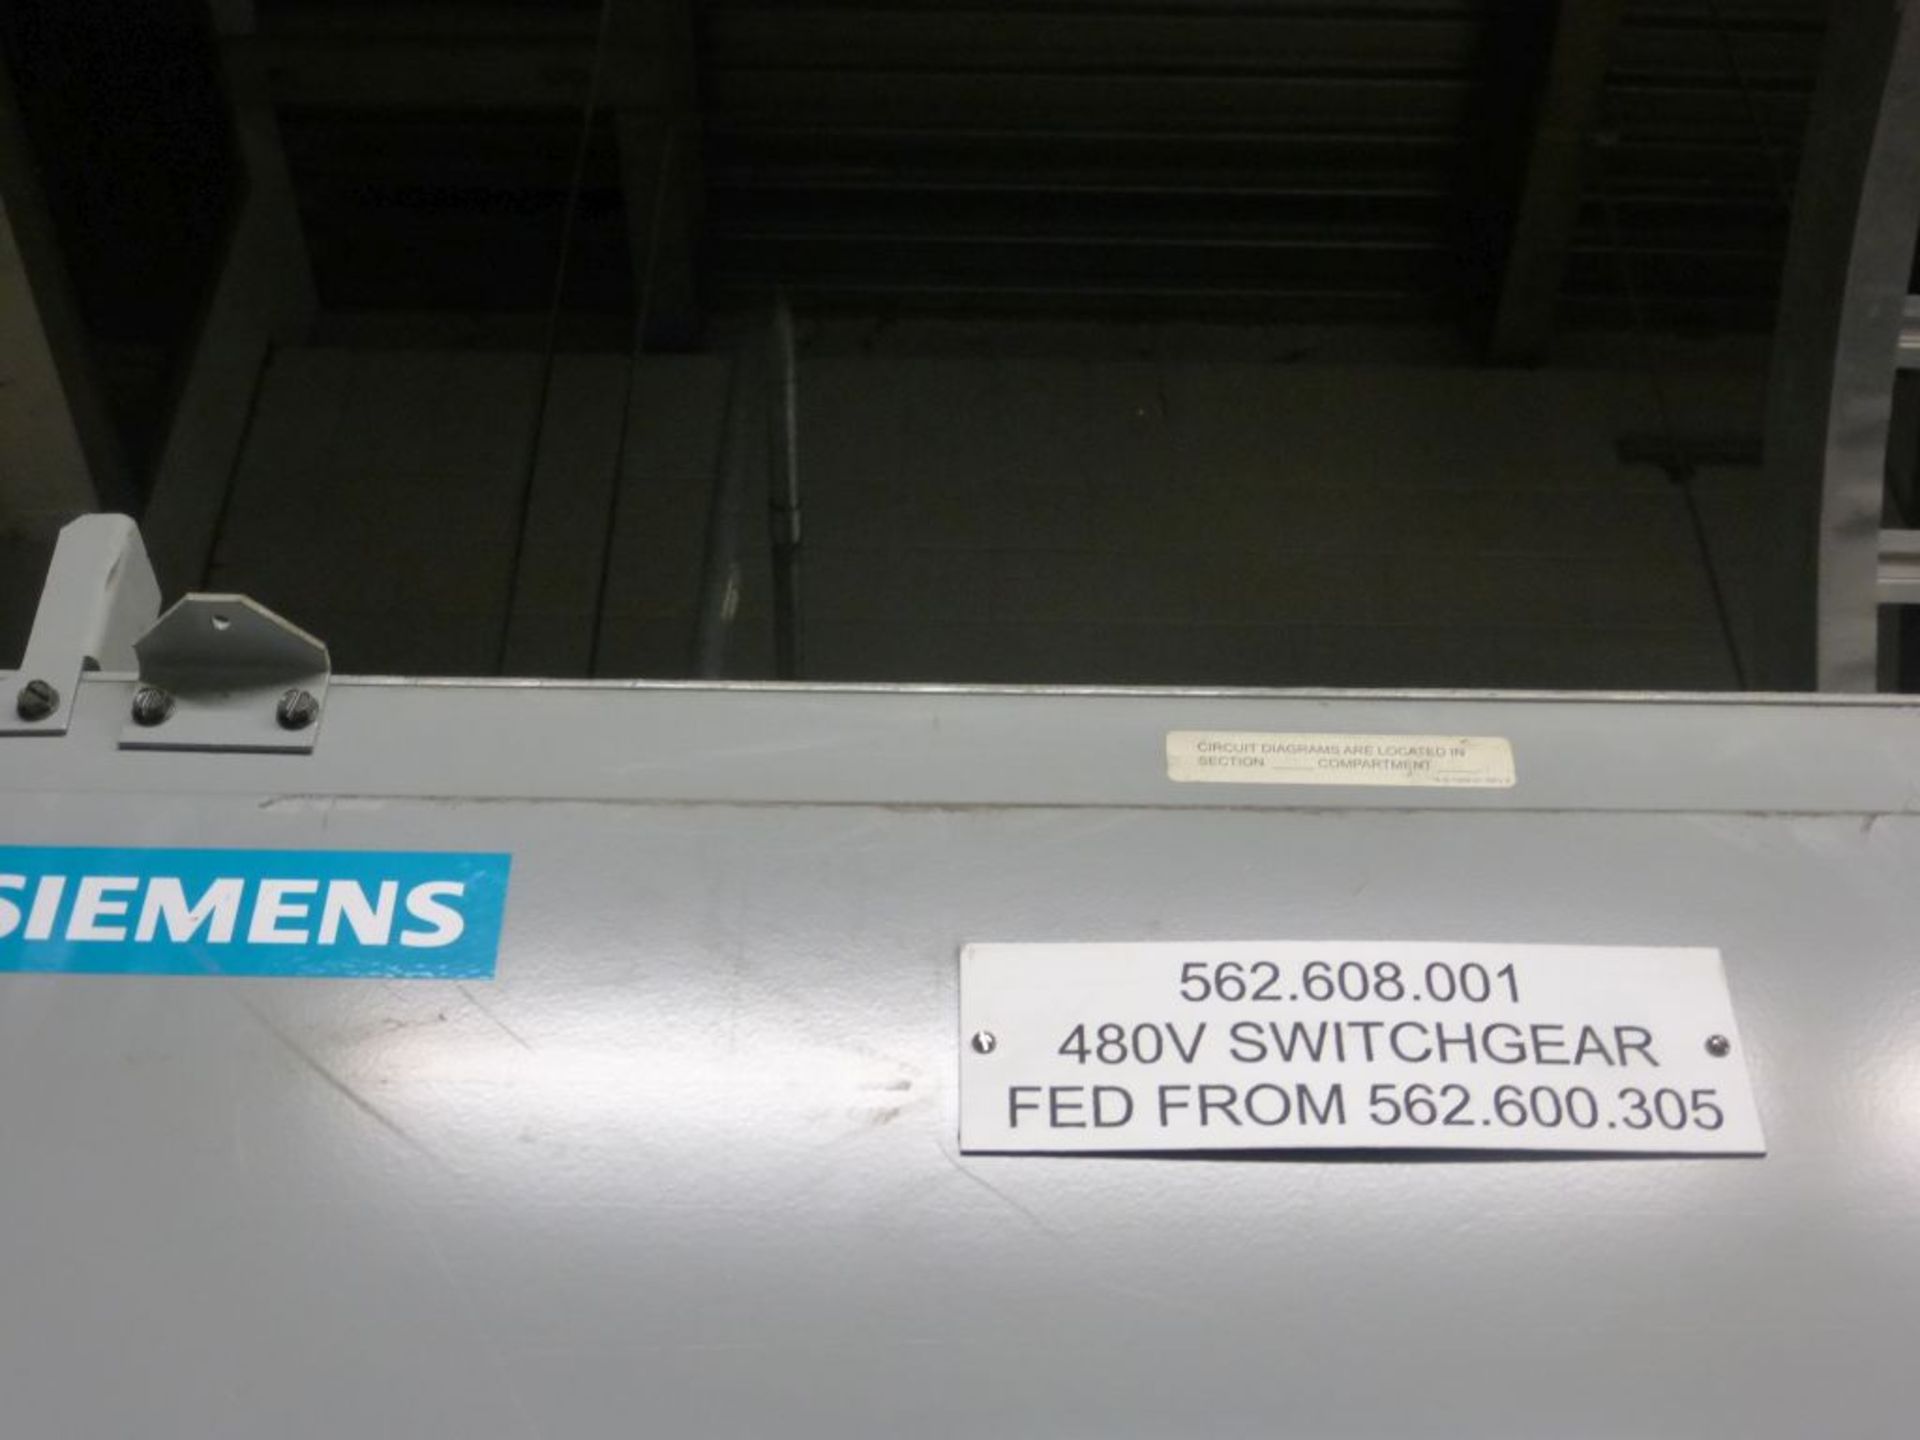 2006 Siemens Switchgear - Removed from Service January 2022 | 480V; Includes: (3) WLH3A340, 4000A, - Image 7 of 58